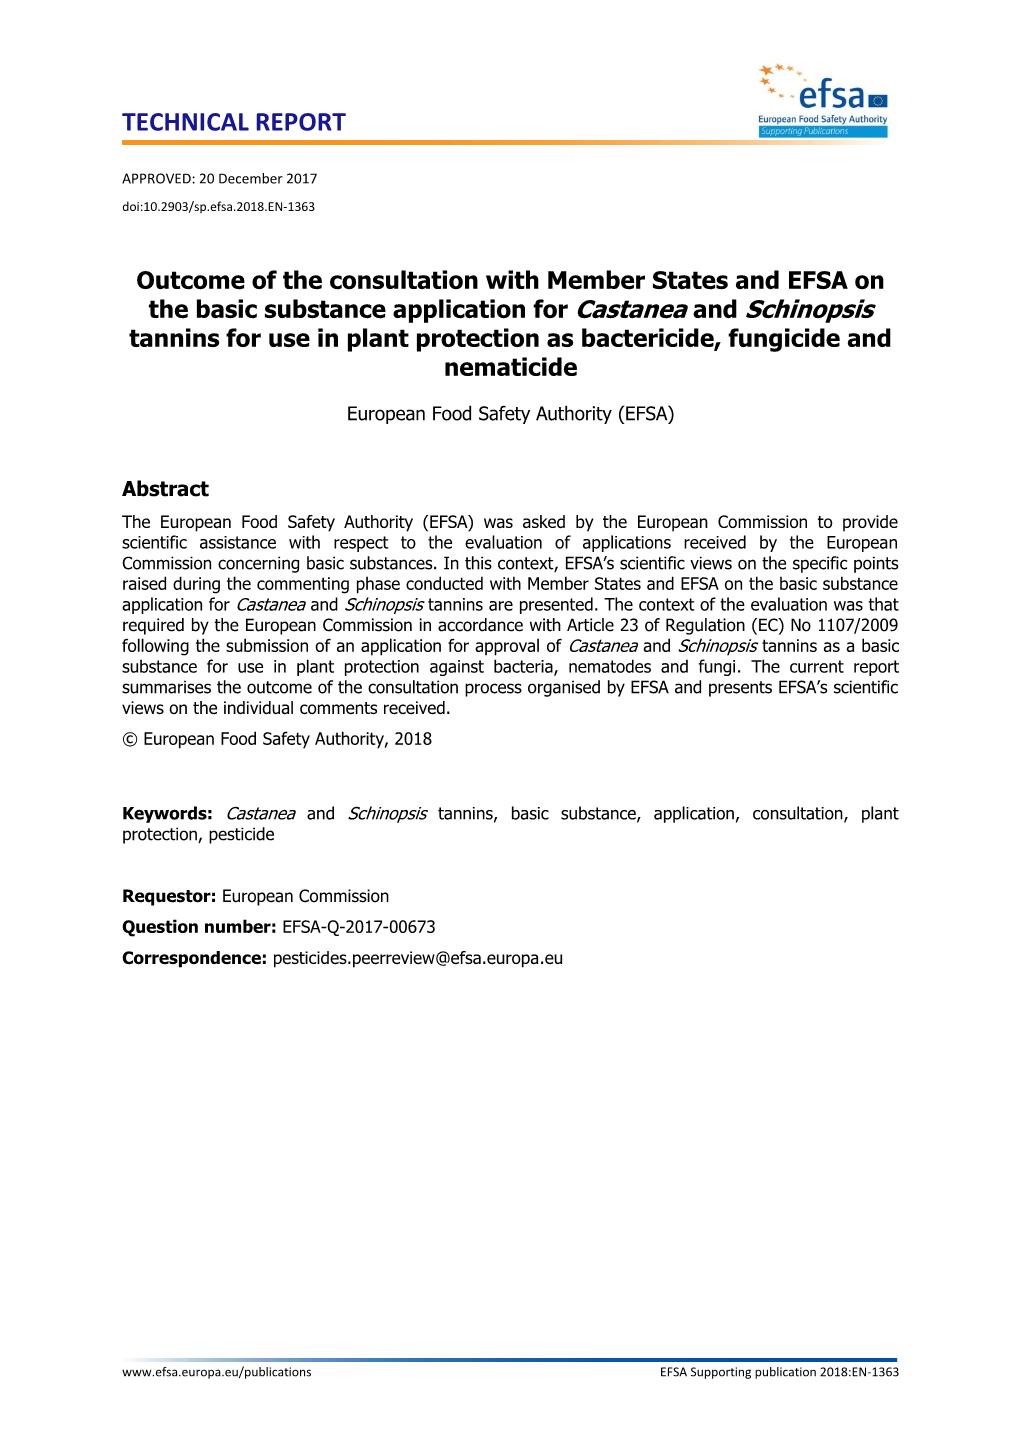 Outcome of the Consultation with Member States and EFSA On